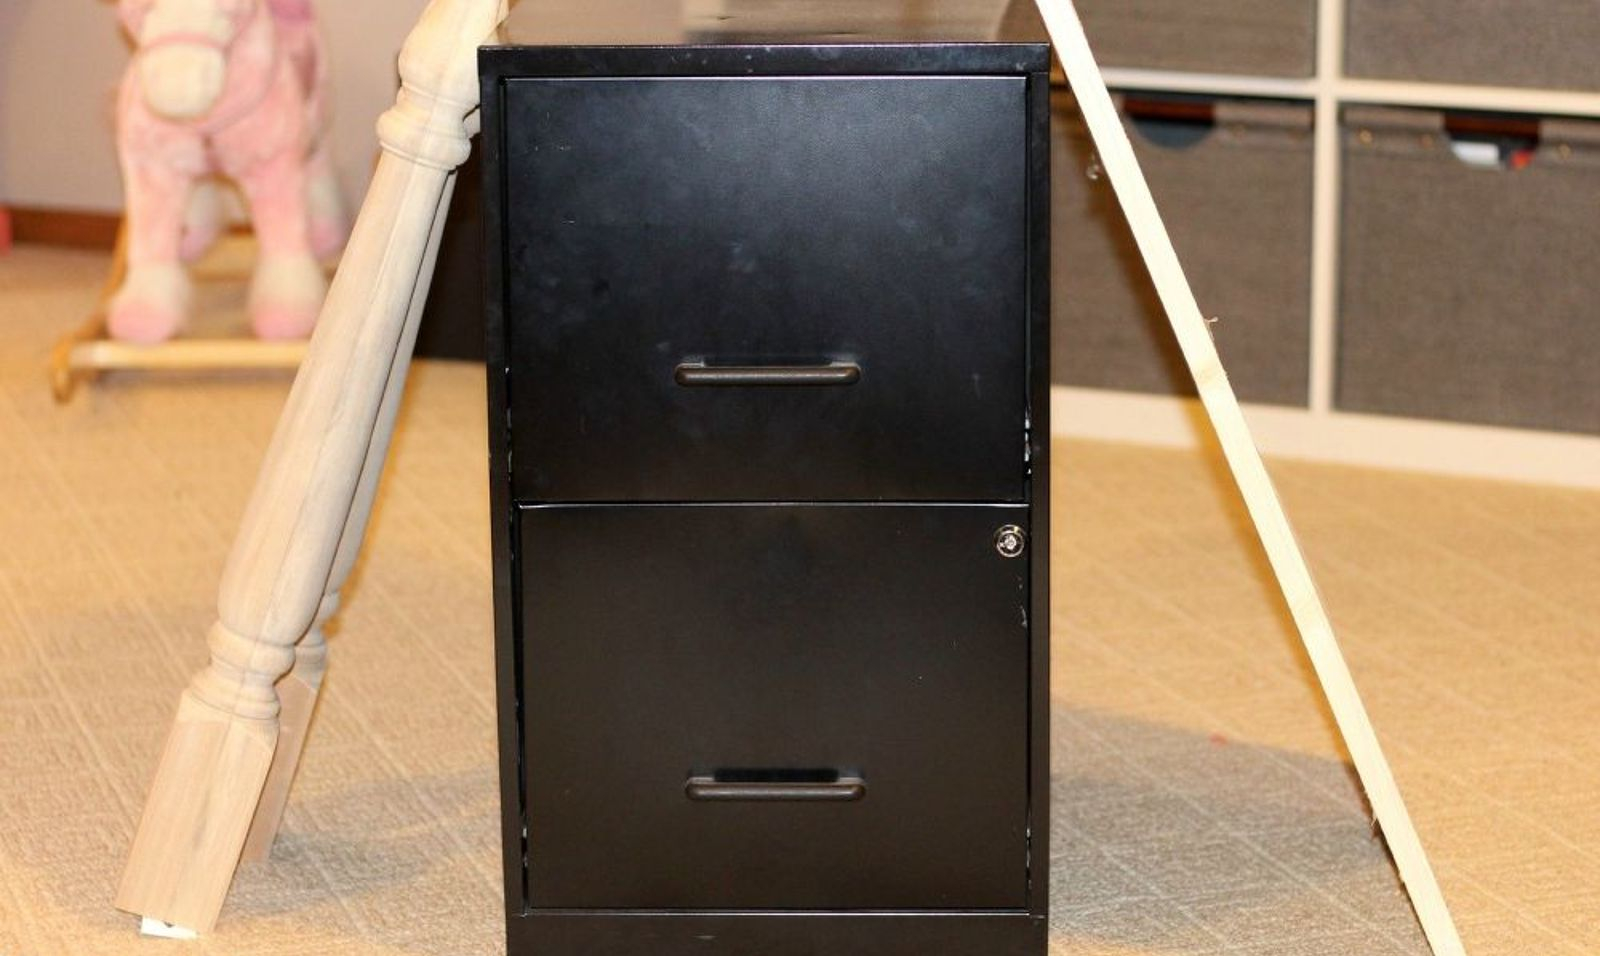 Scrap Metal Filing Cabinet Amazing 3 Drawer File Cabinet Flat File intended for size 1600 X 956